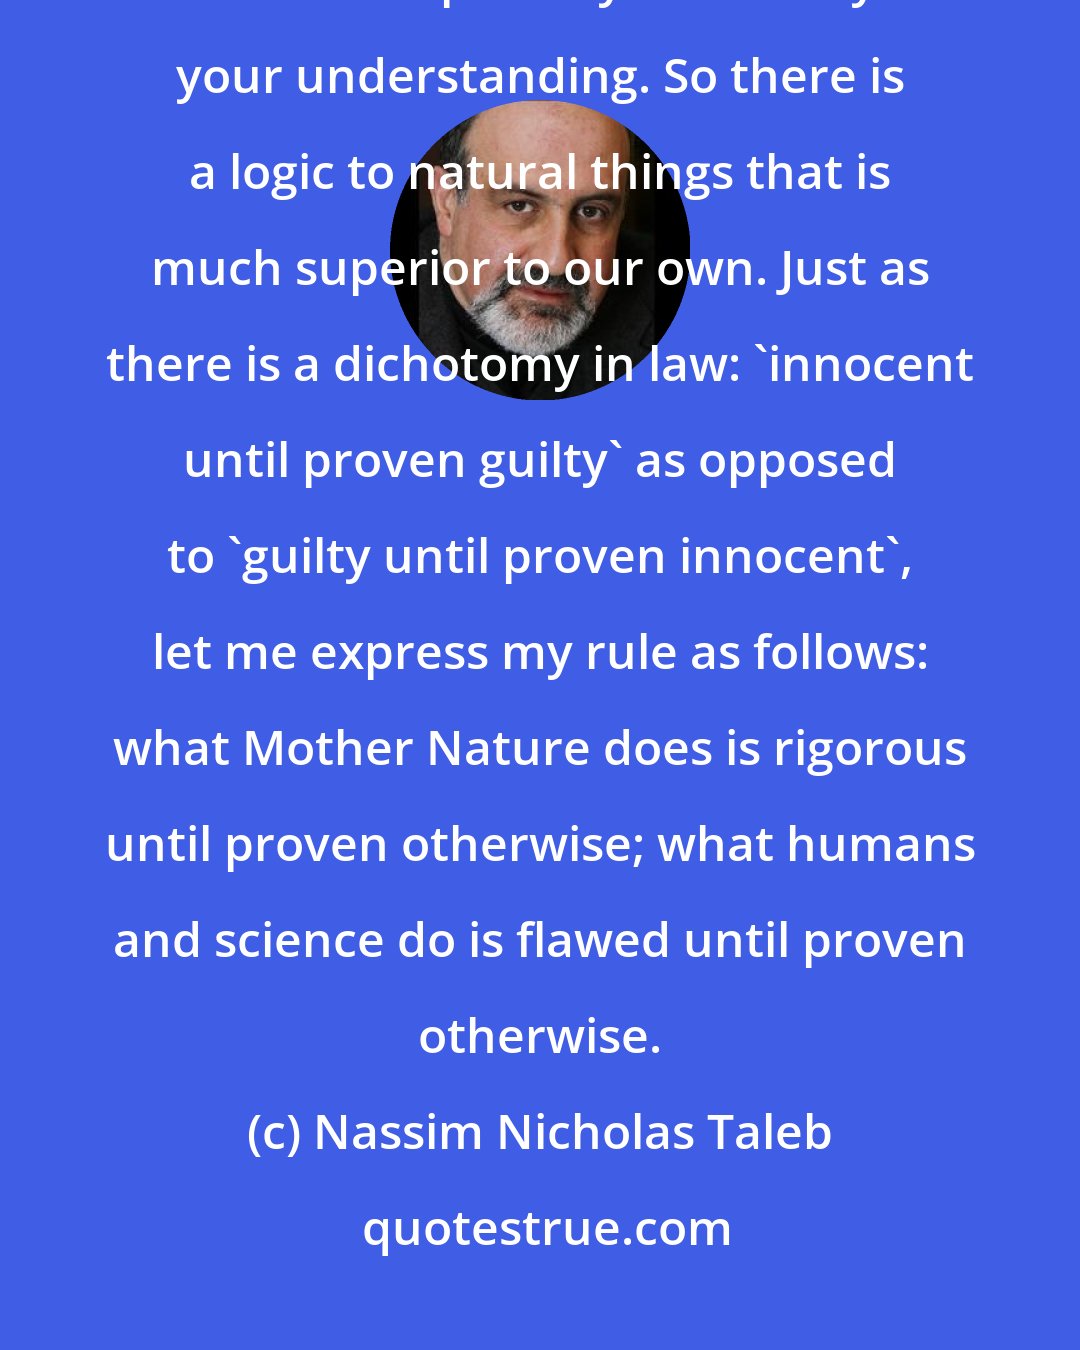 Nassim Nicholas Taleb: If there is something in nature you don't understand, odds are it makes sense in a deeper way that is beyond your understanding. So there is a logic to natural things that is much superior to our own. Just as there is a dichotomy in law: 'innocent until proven guilty' as opposed to 'guilty until proven innocent', let me express my rule as follows: what Mother Nature does is rigorous until proven otherwise; what humans and science do is flawed until proven otherwise.